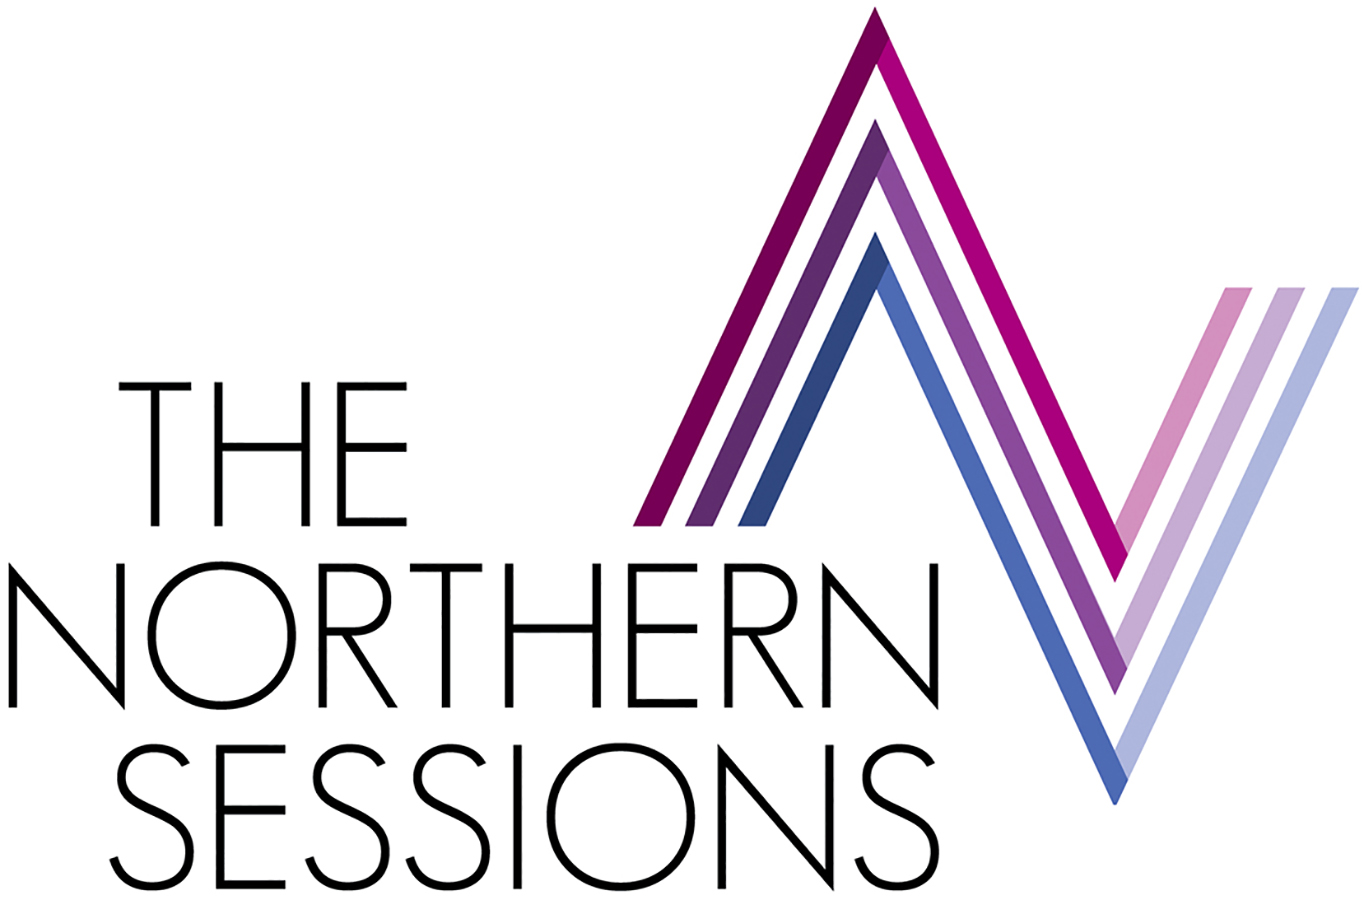 The Northern Sessions logo